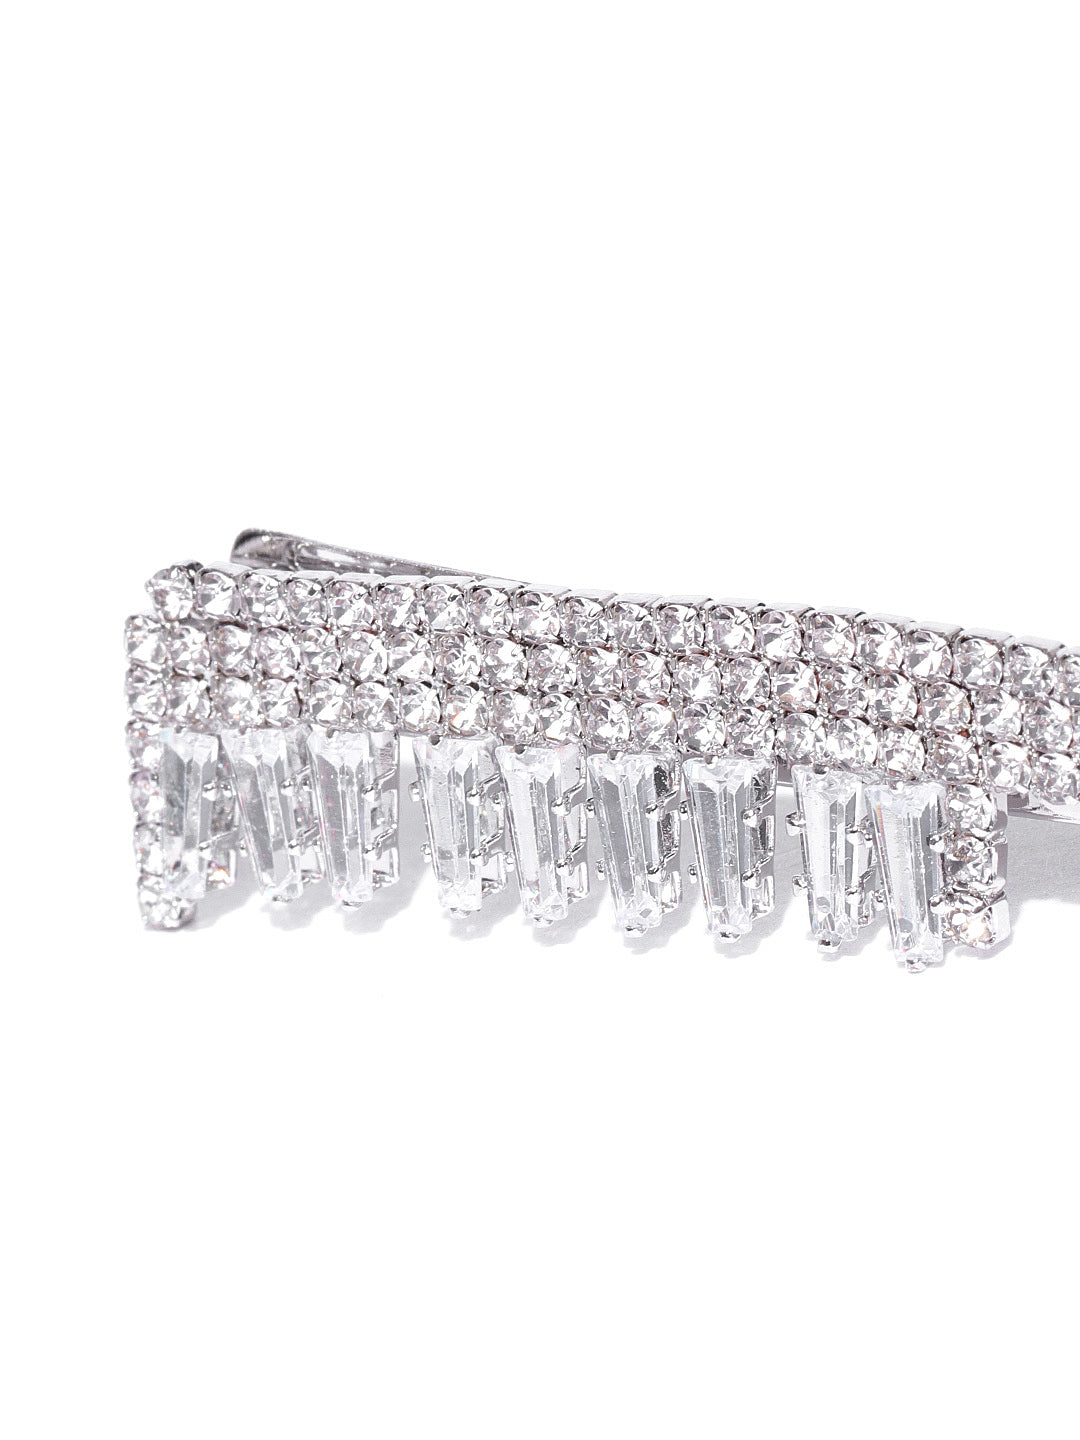 Blueberry silver crystal stone embellished comb shape alligator hair clip